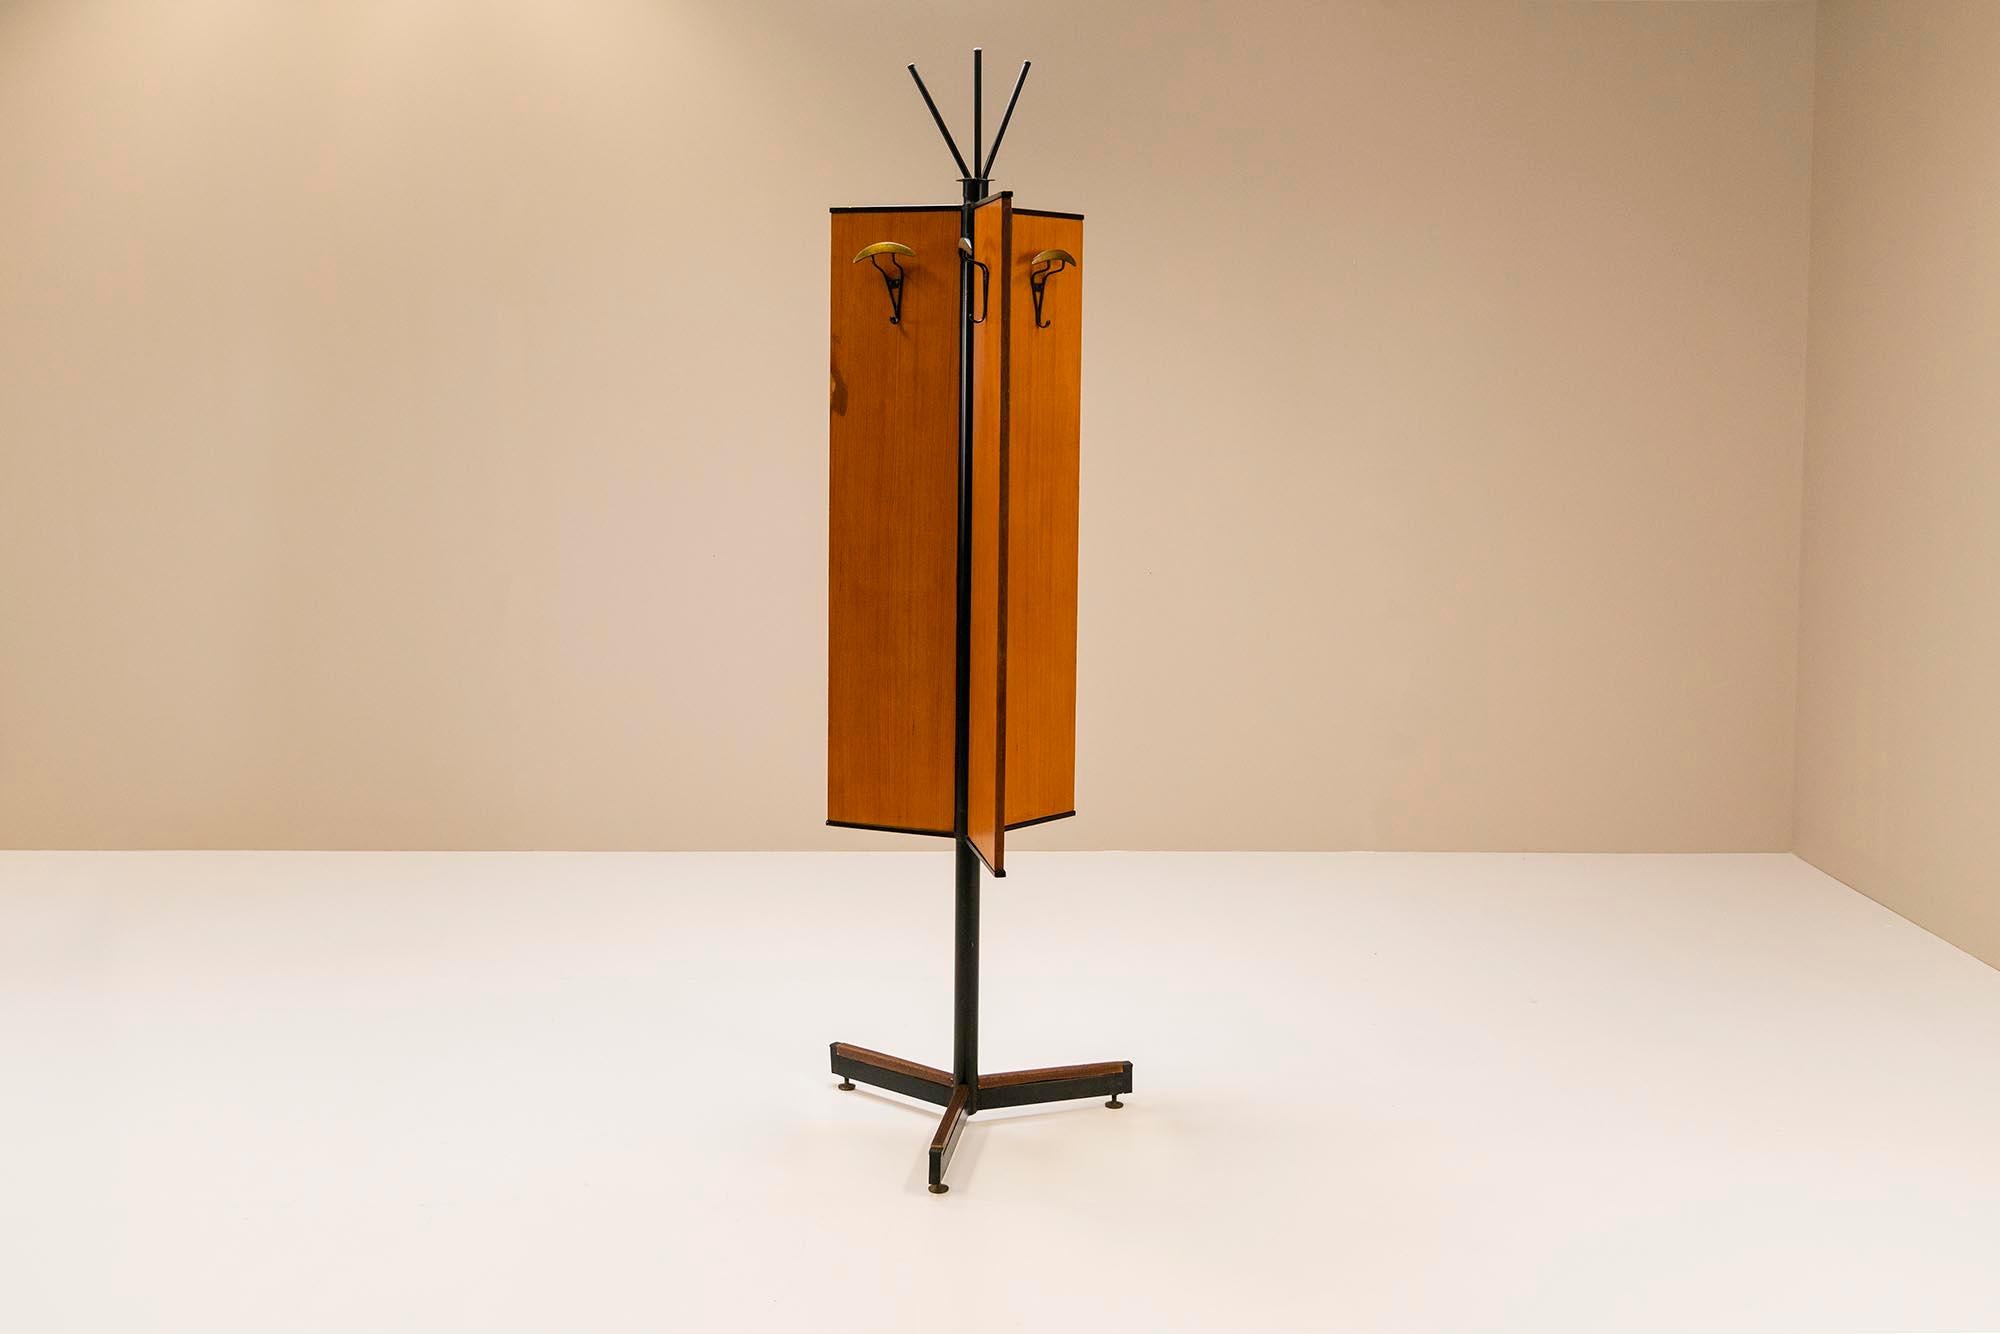 This special Italian coat rack dates from the 1960s and is an absolute eye-catcher due to its highly artistic style. The three rectangular feet are inlaid with wood stand-on brass adjustable feet that can be raised or lowered a few centimeters. In